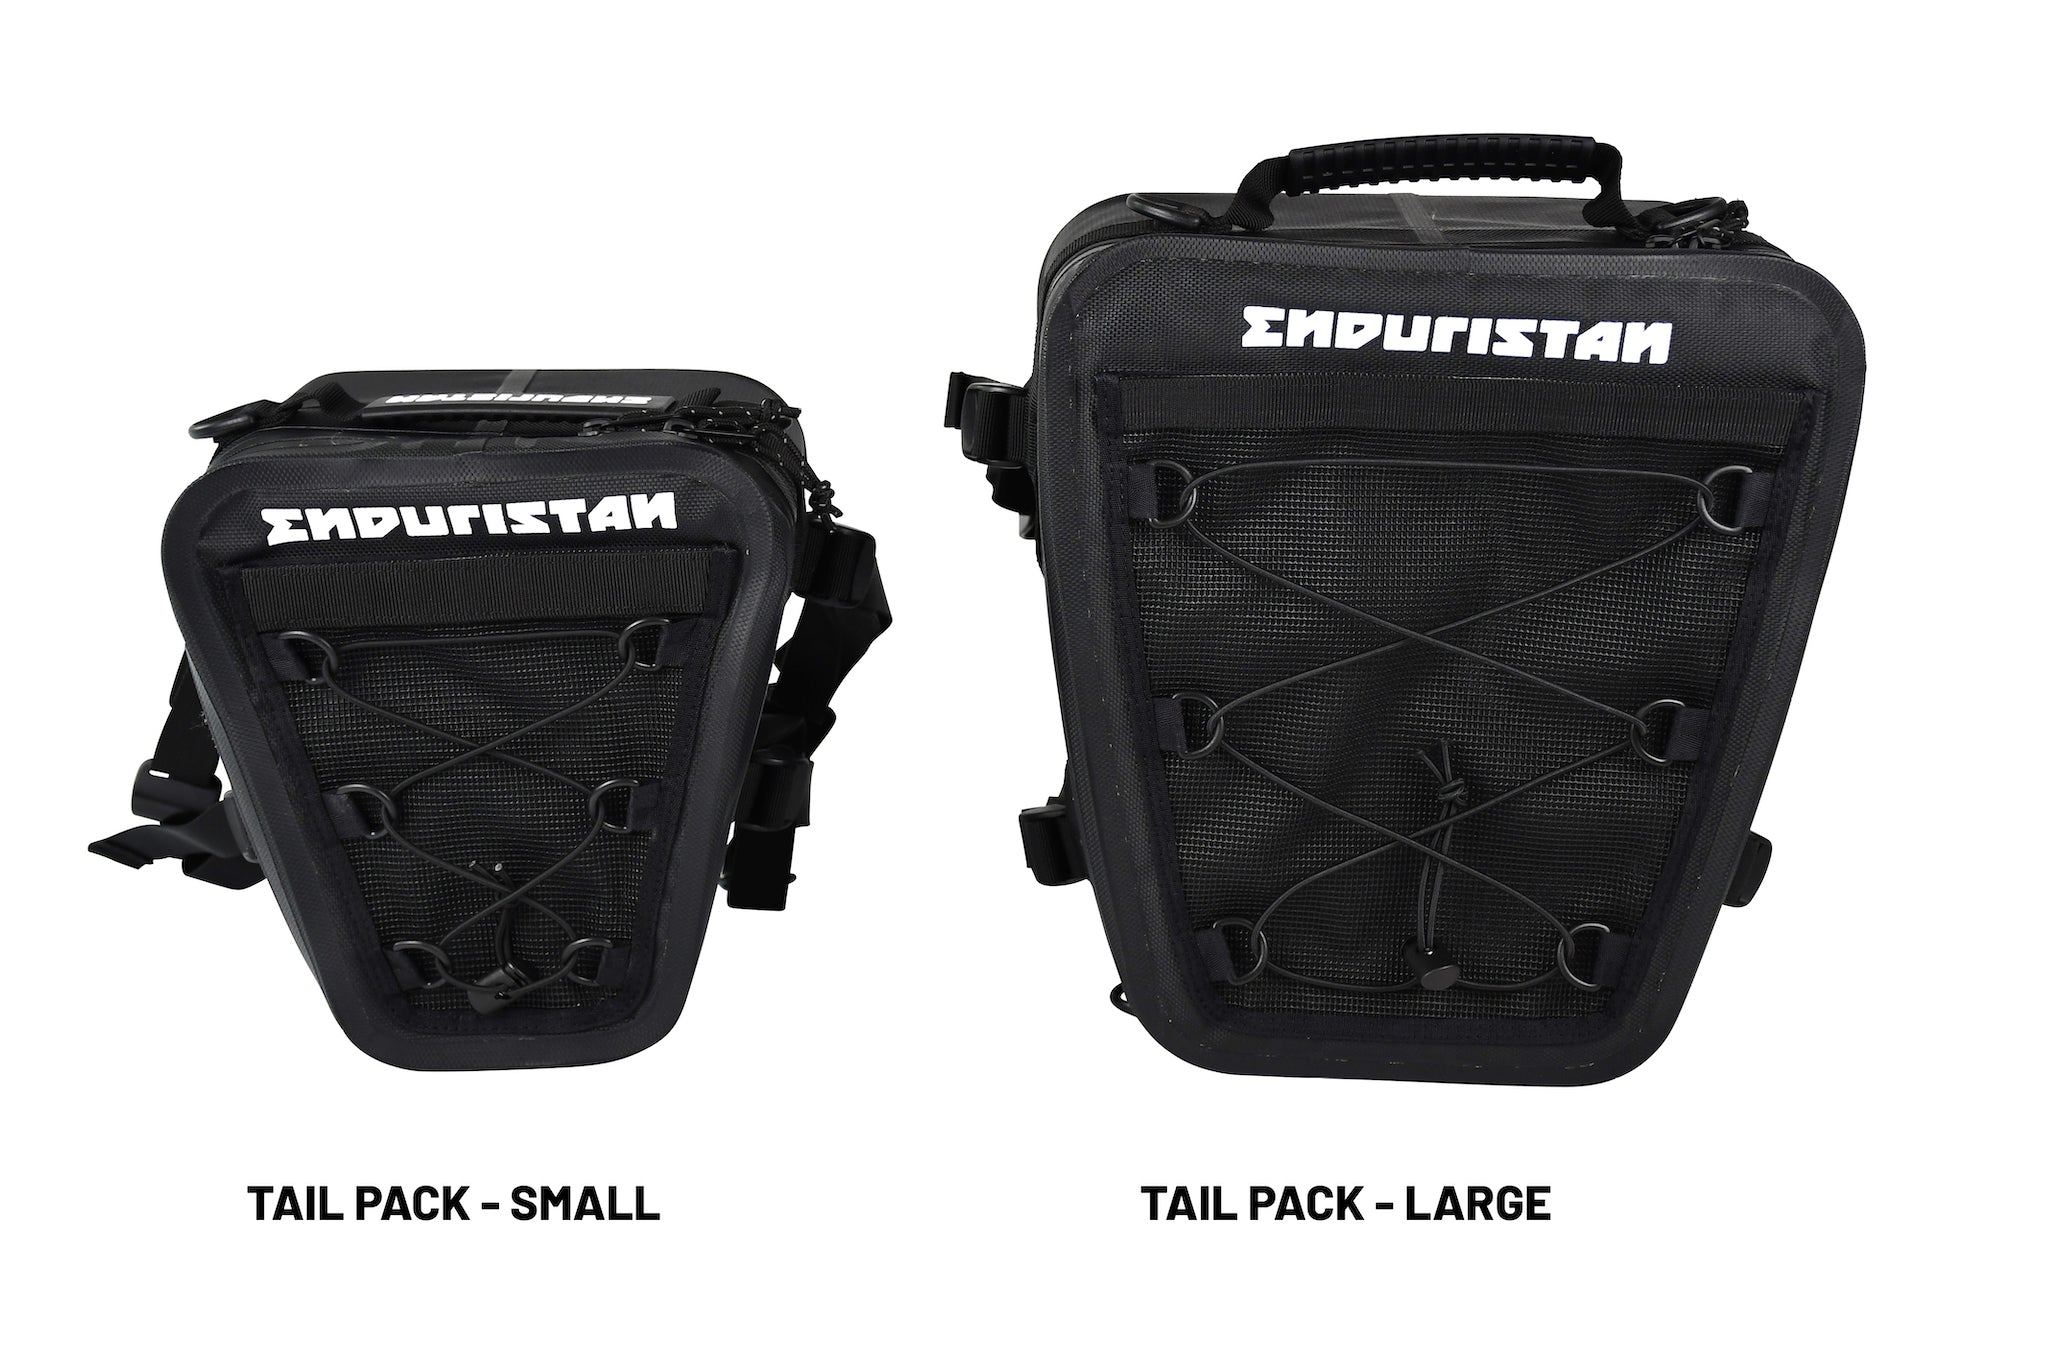 Hecktasche Tail Pack - Small